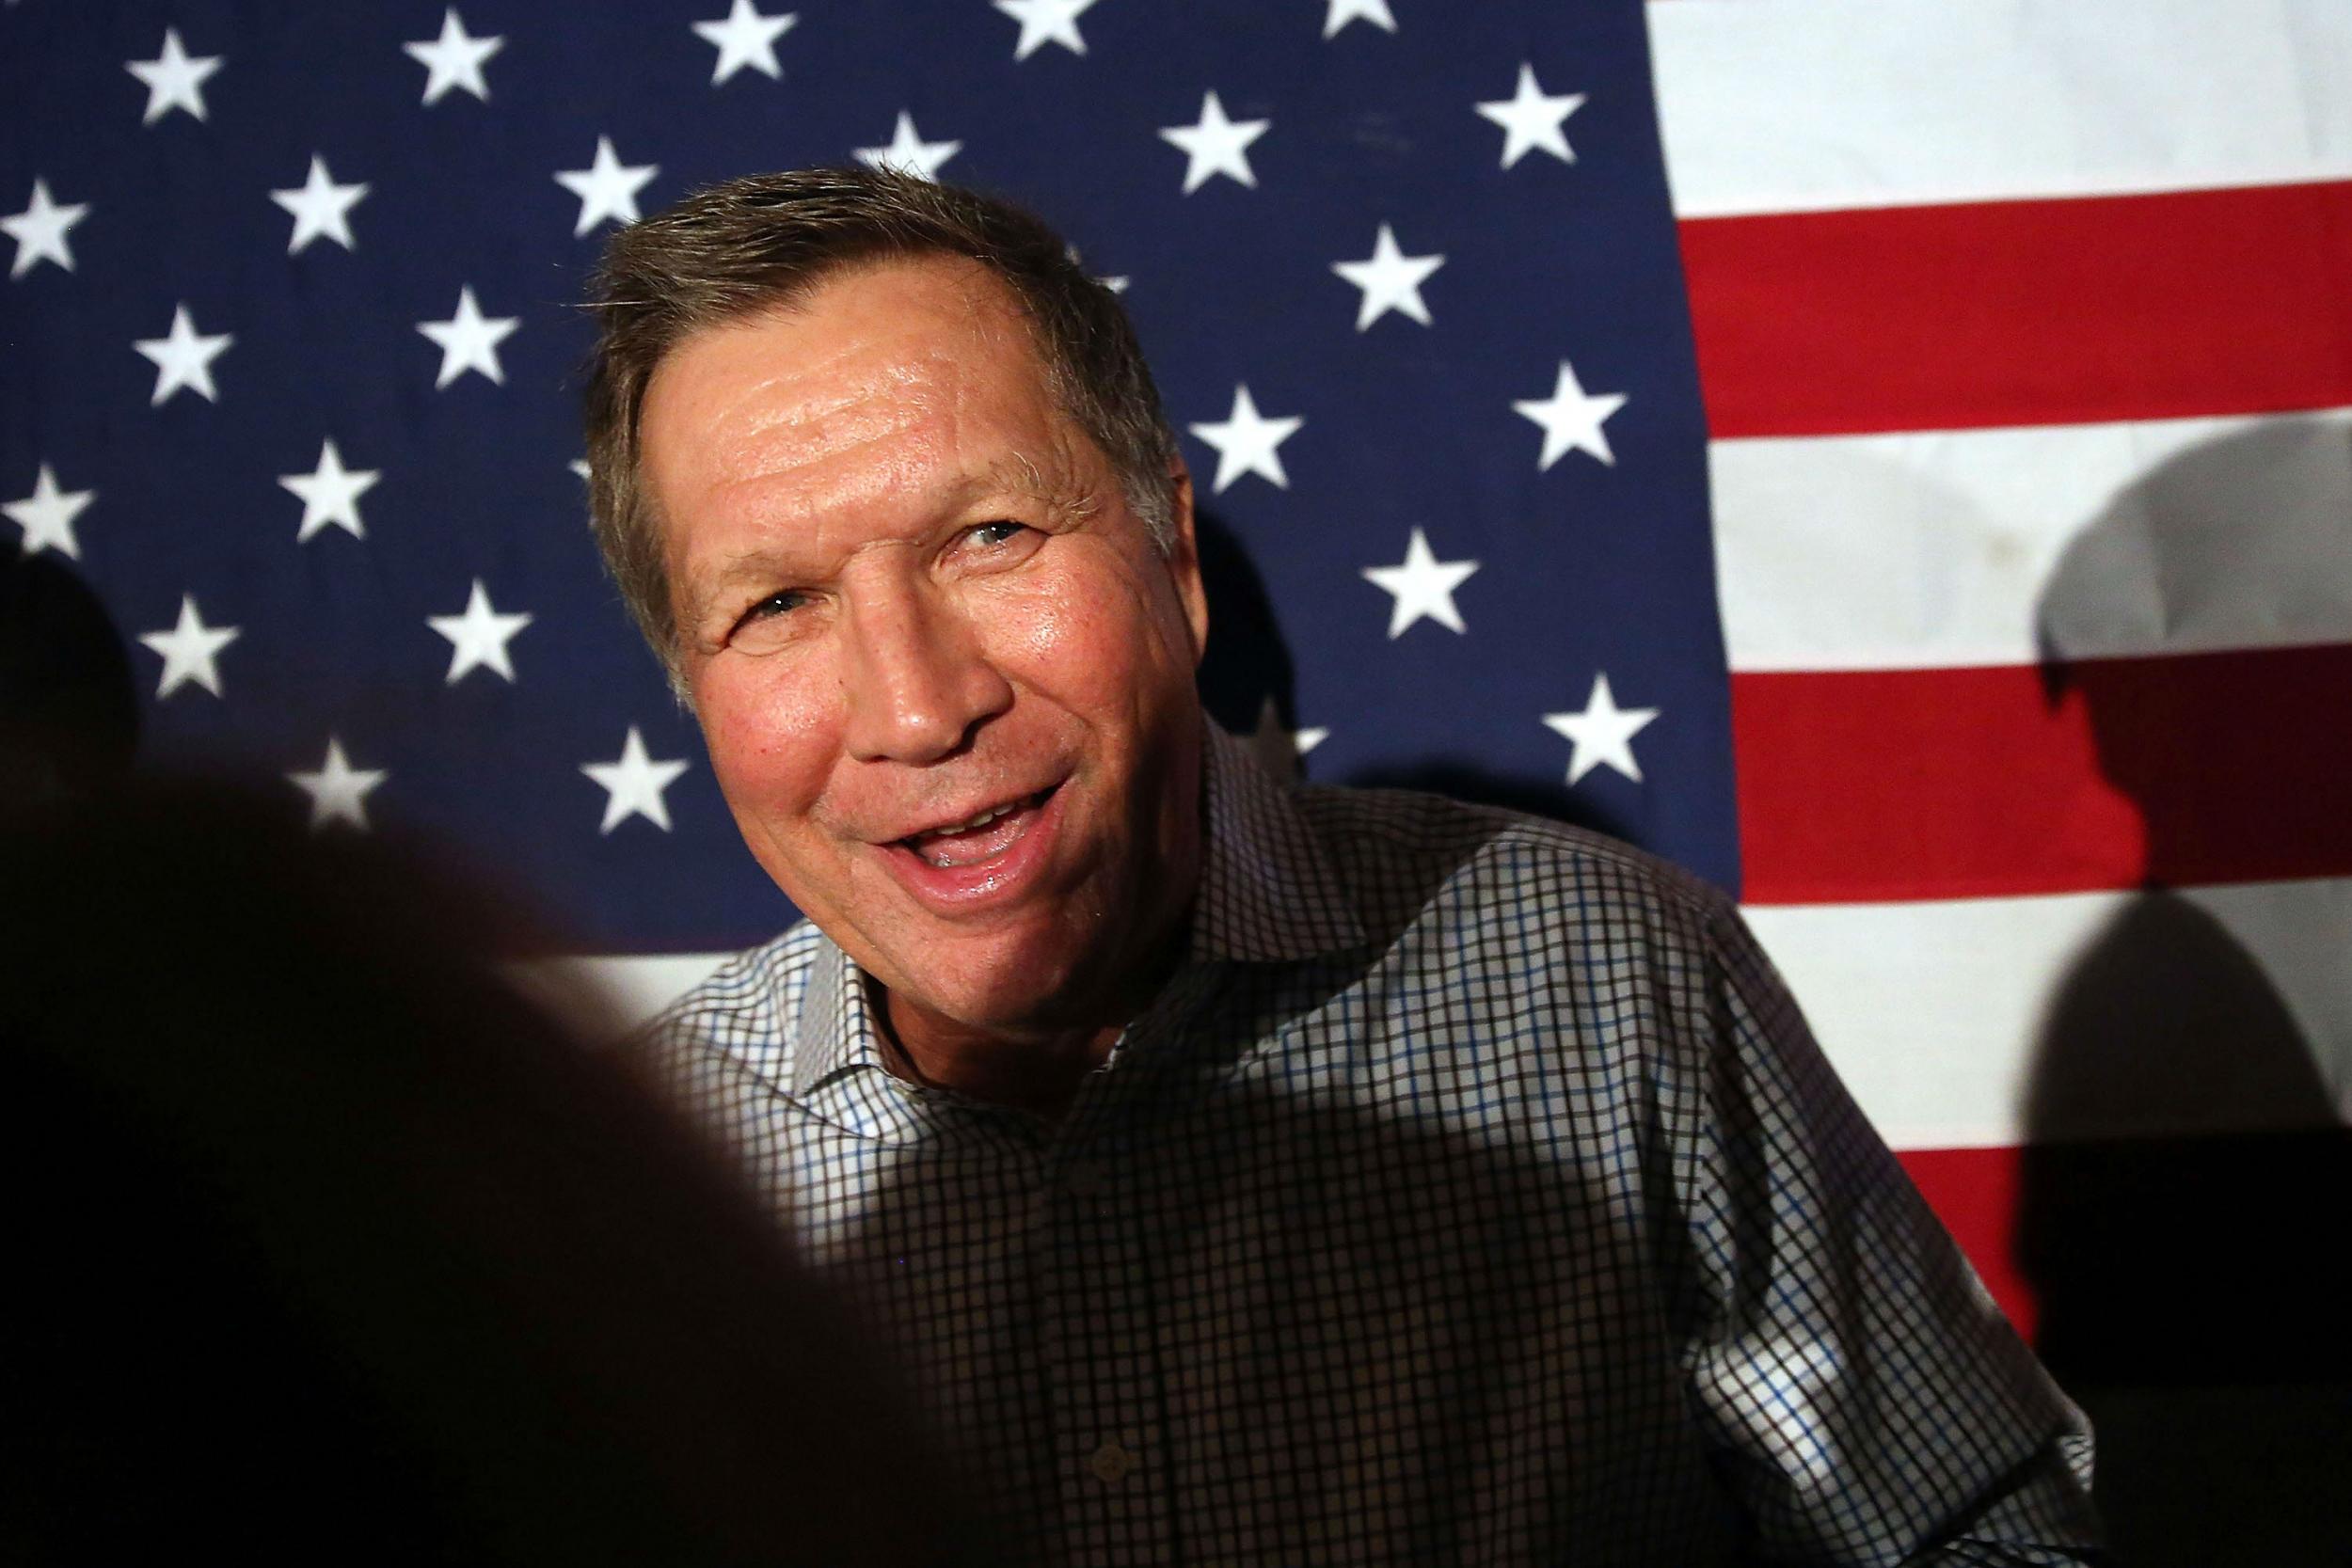 Mr Kasich's campaign has been given a boost since New Hampshire